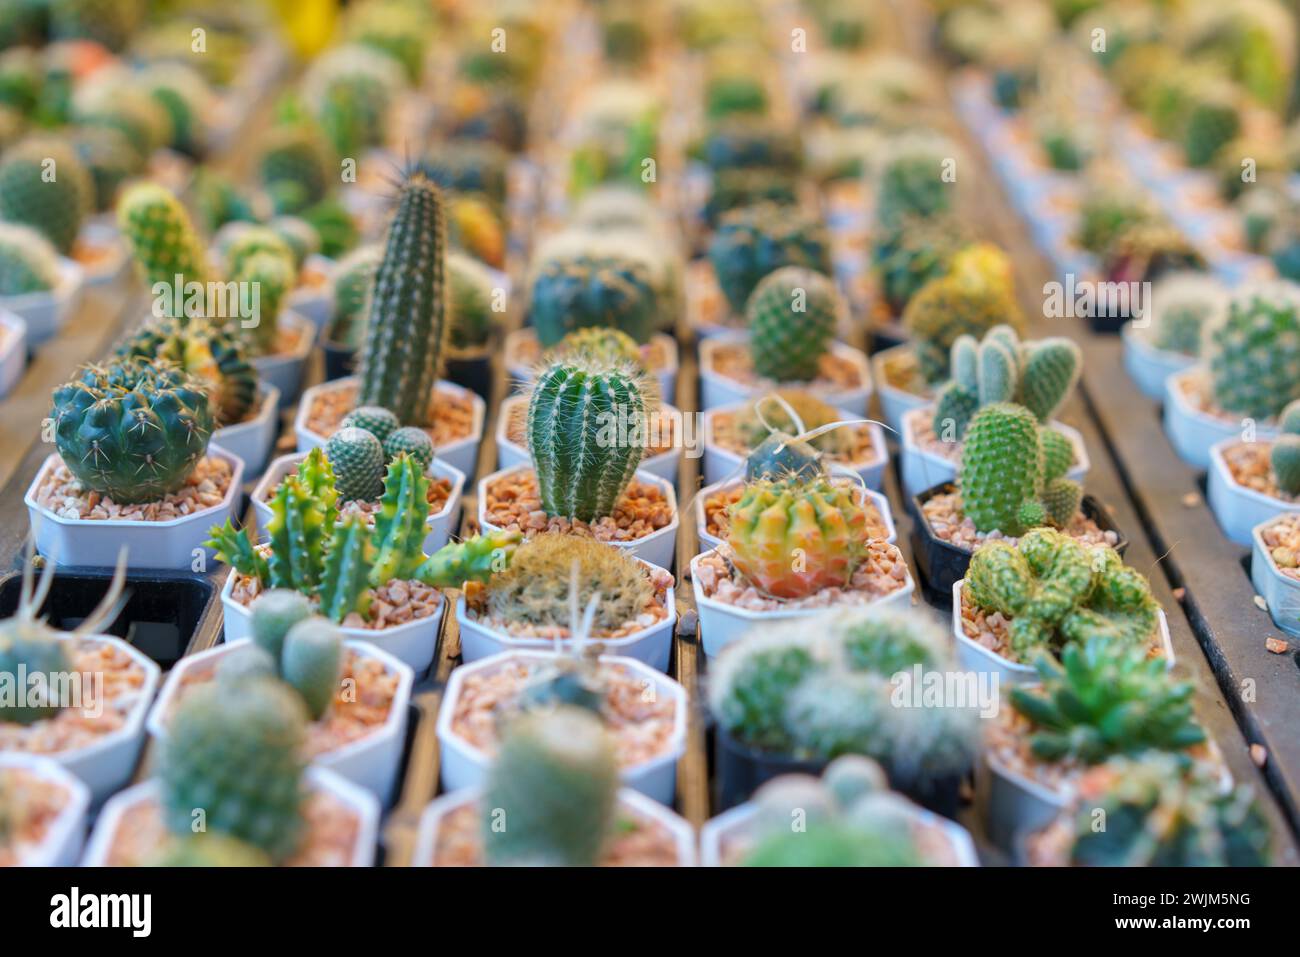 An extensive collection of miniature cacti in various shapes and sizes, neatly potted and lined up for display in a garden center. Stock Photo